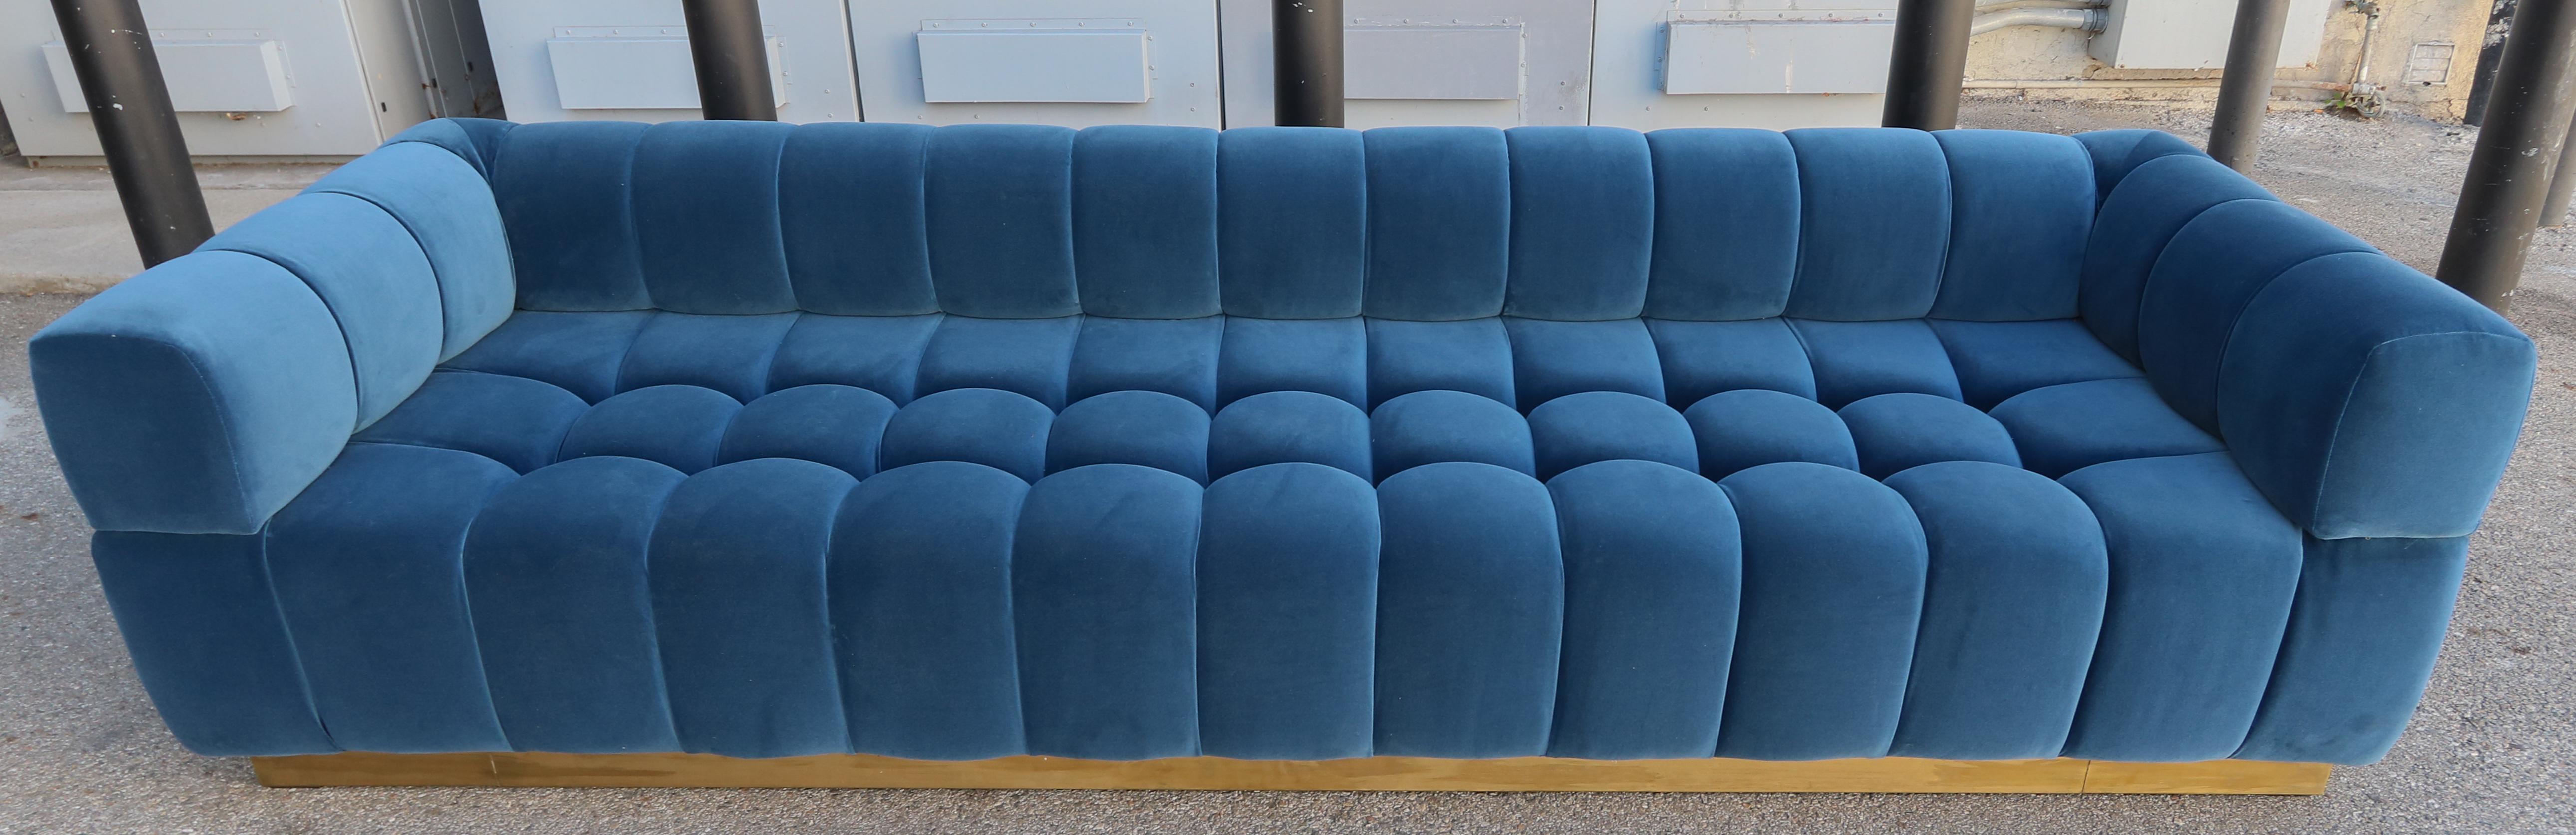 Custom Tufted Blue Velvet Sofa with Brass Base by Adesso Imports For Sale 1